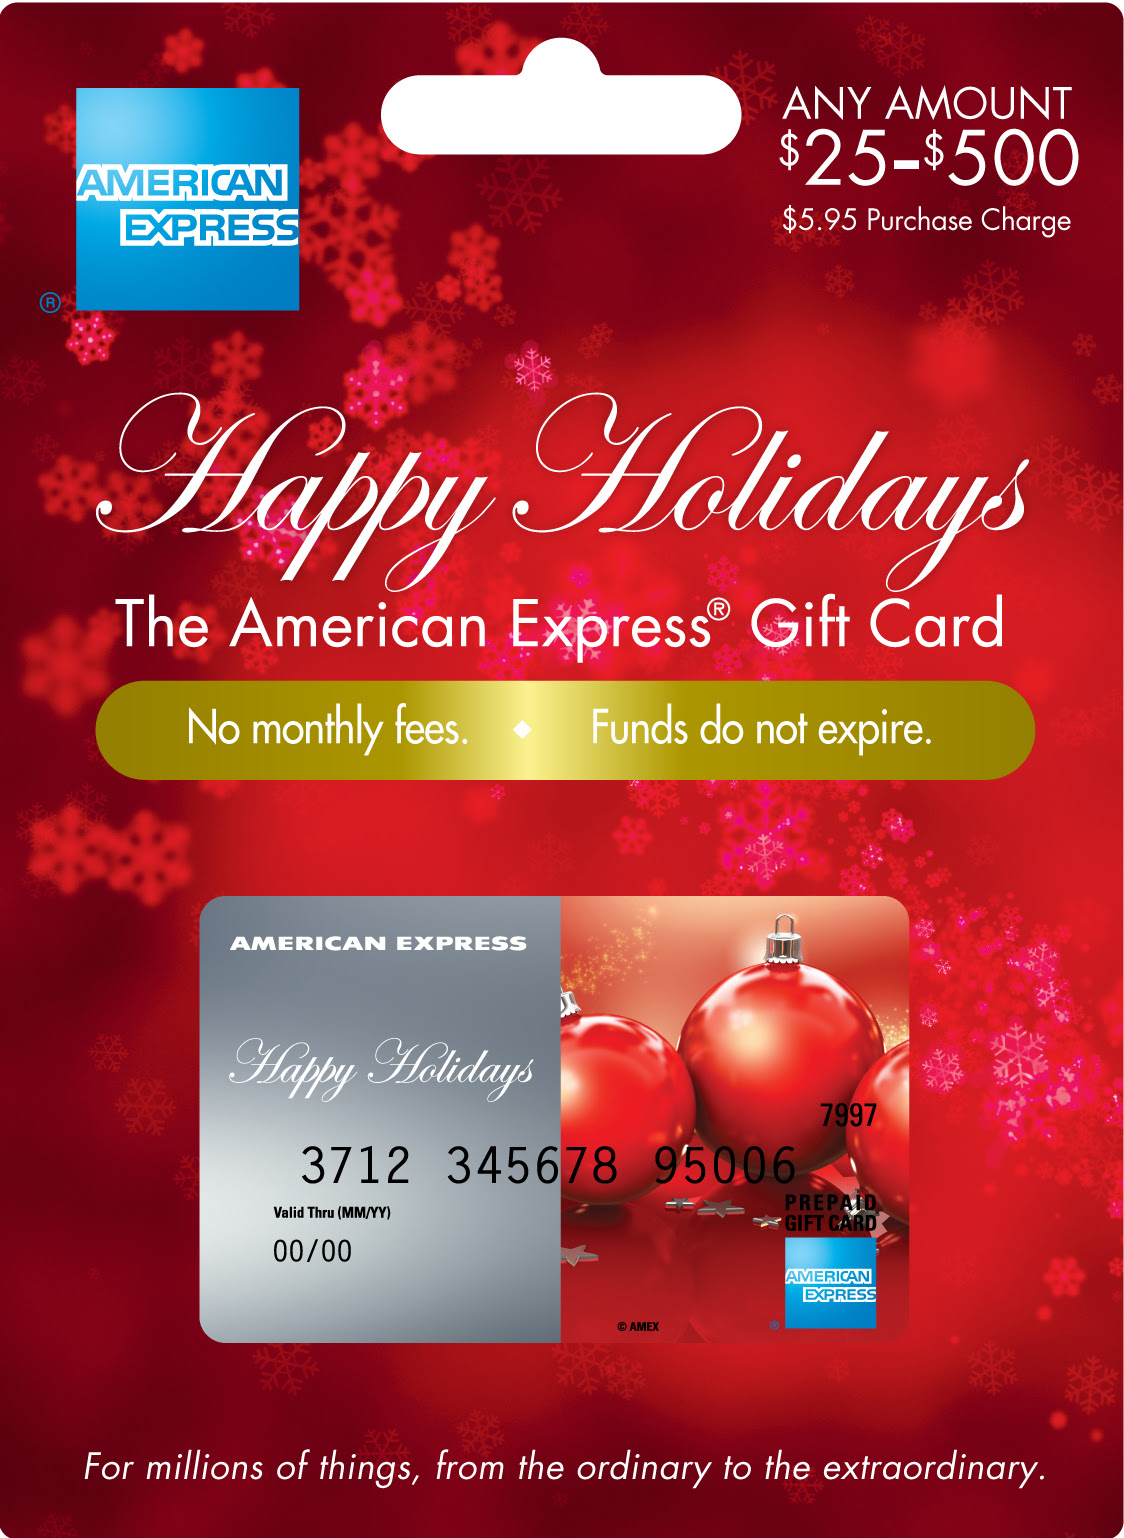 $500 American Express Gift Cards Giveaway! - MomSpotted